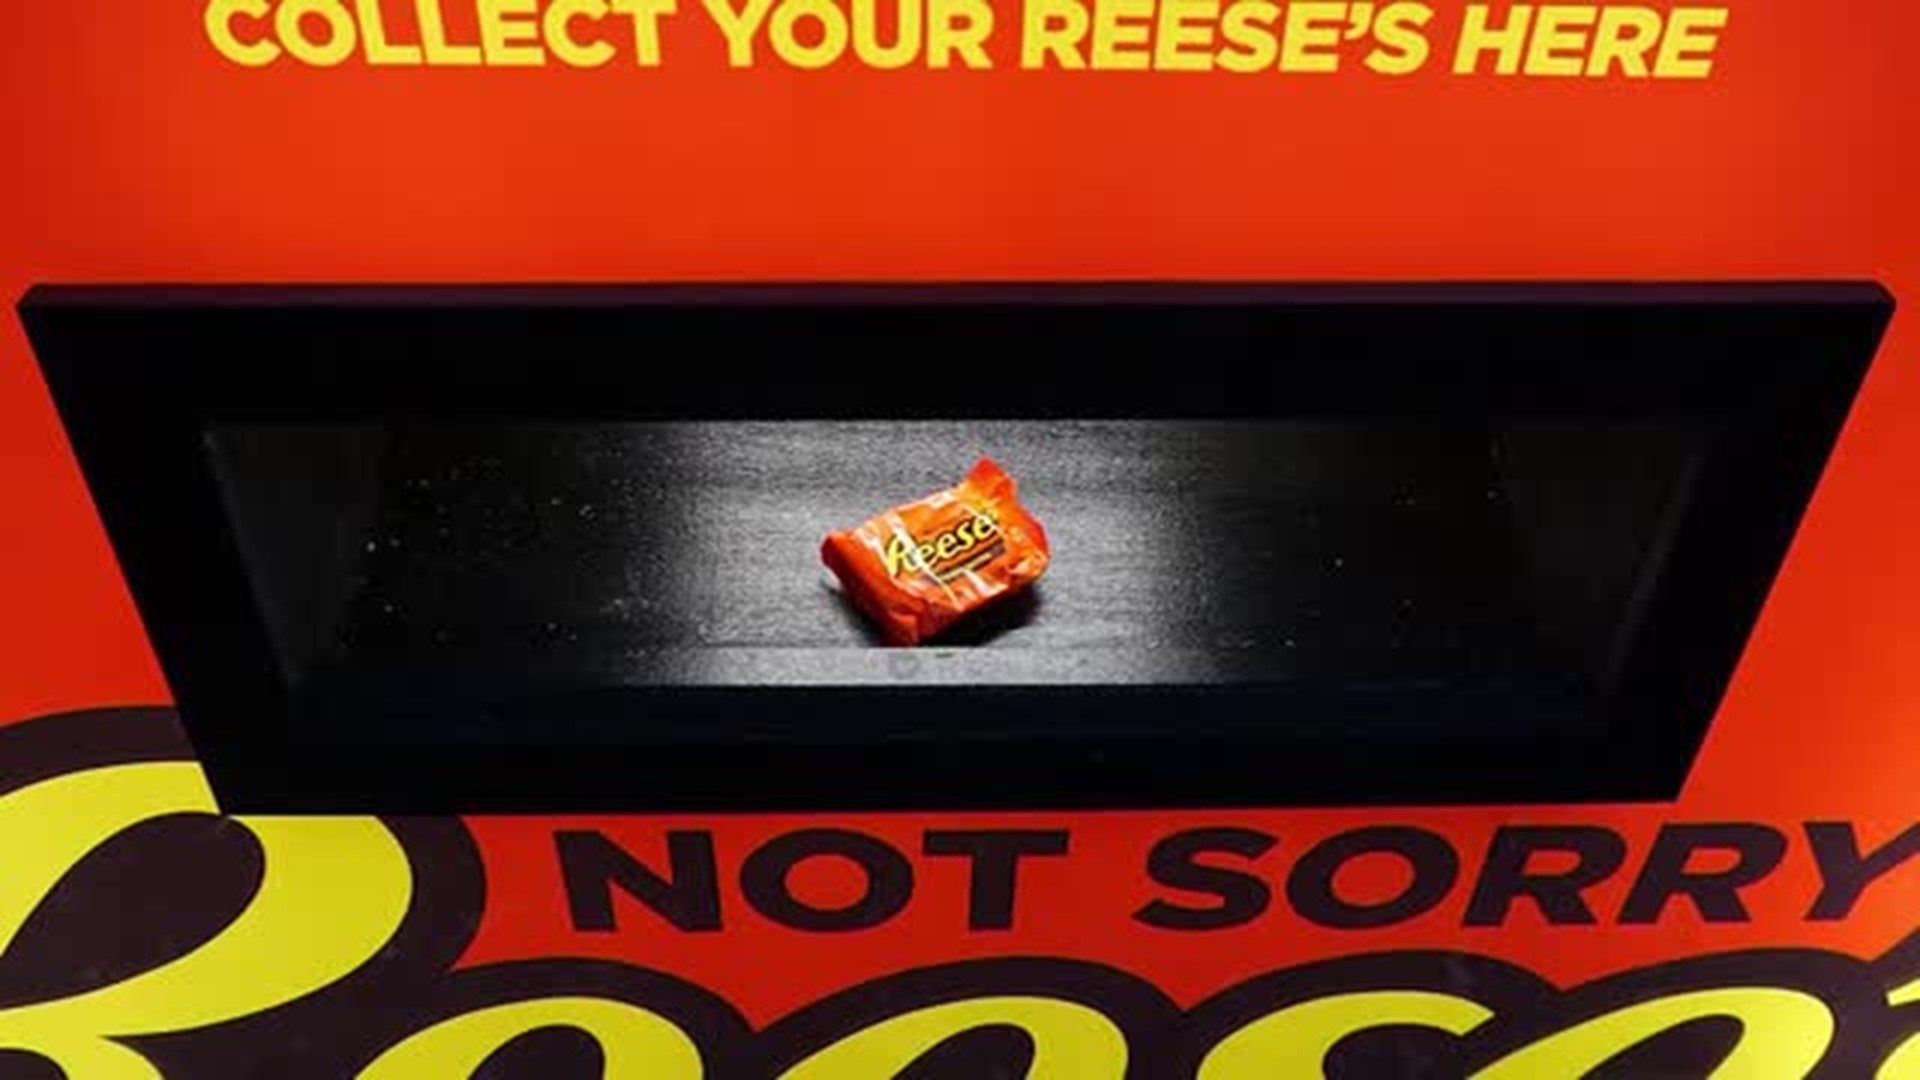 Trade Unwanted Halloween Candy for Reese's Peanut Butter Cups